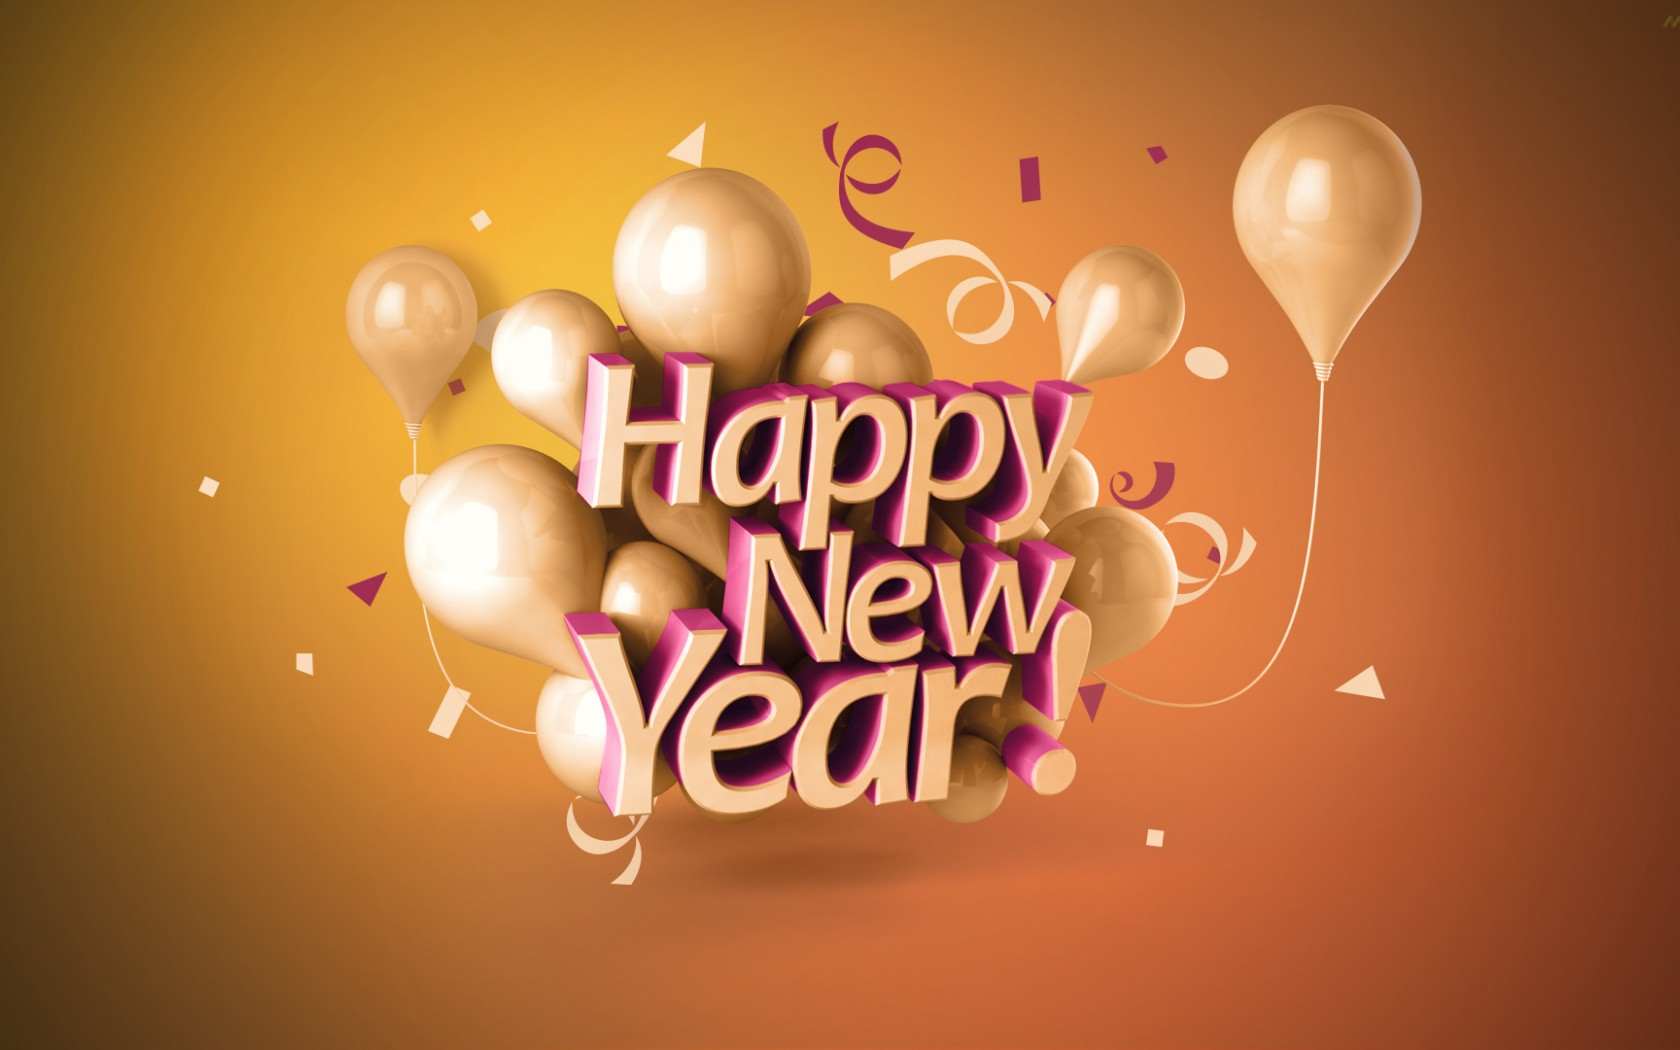 Happy New Year Wallpaper, New Year HD Image 2020